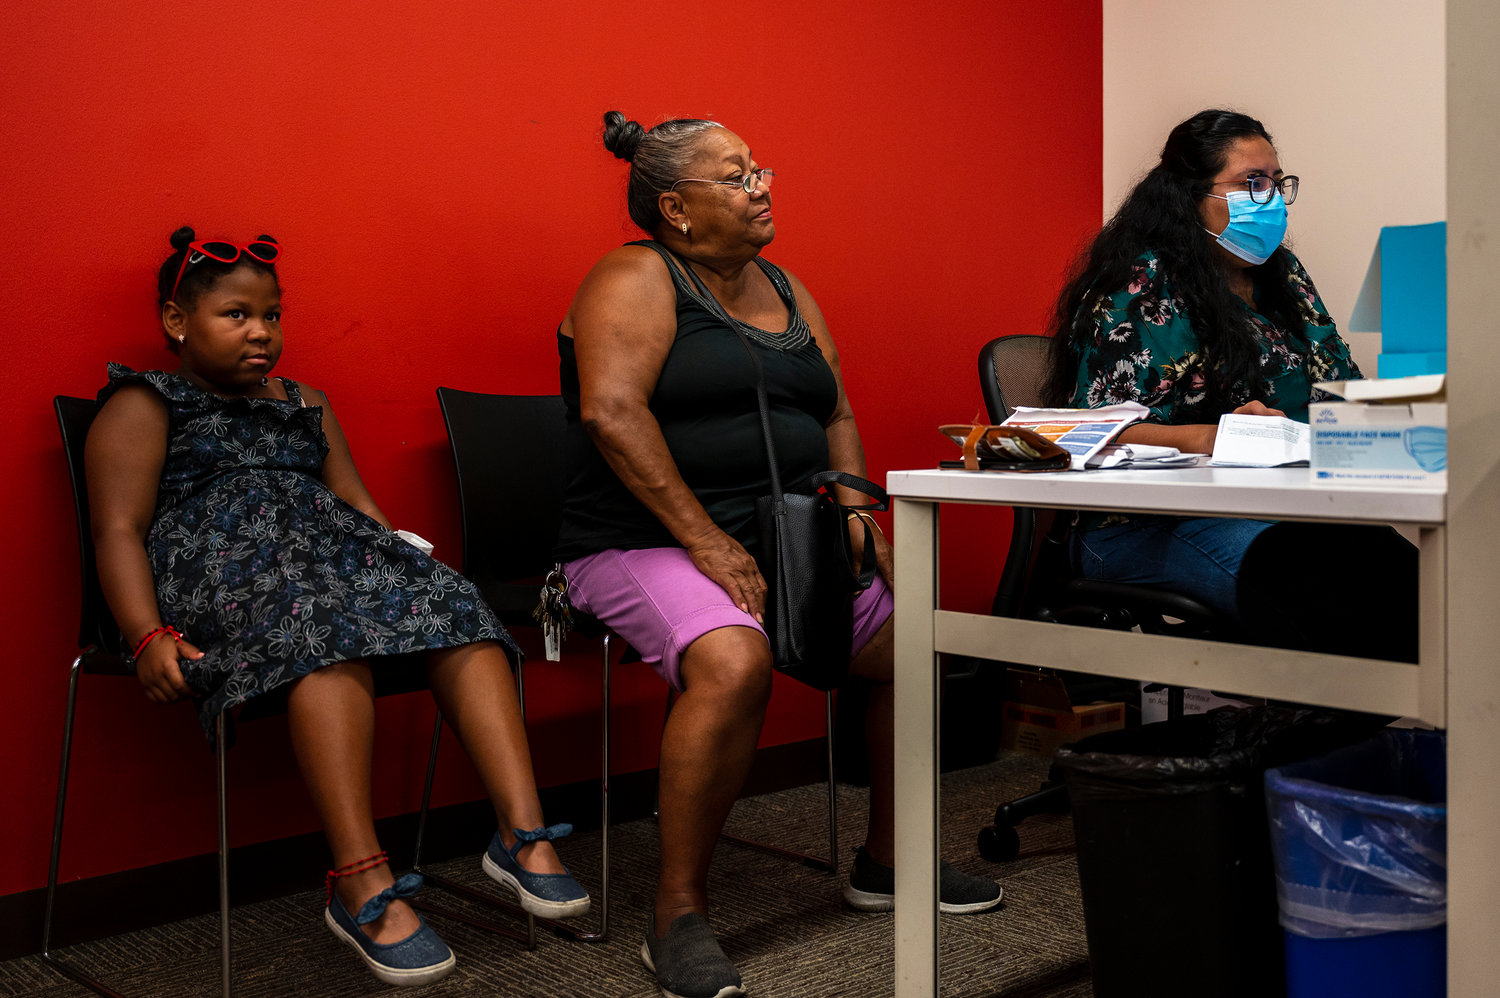 Yessica Flores, a caseworker at Part of the Solution, helps clients Nellie Chacon and her granddaughter Cherish Chacon on a Monday afternoon with her Section 8 voucher issue.